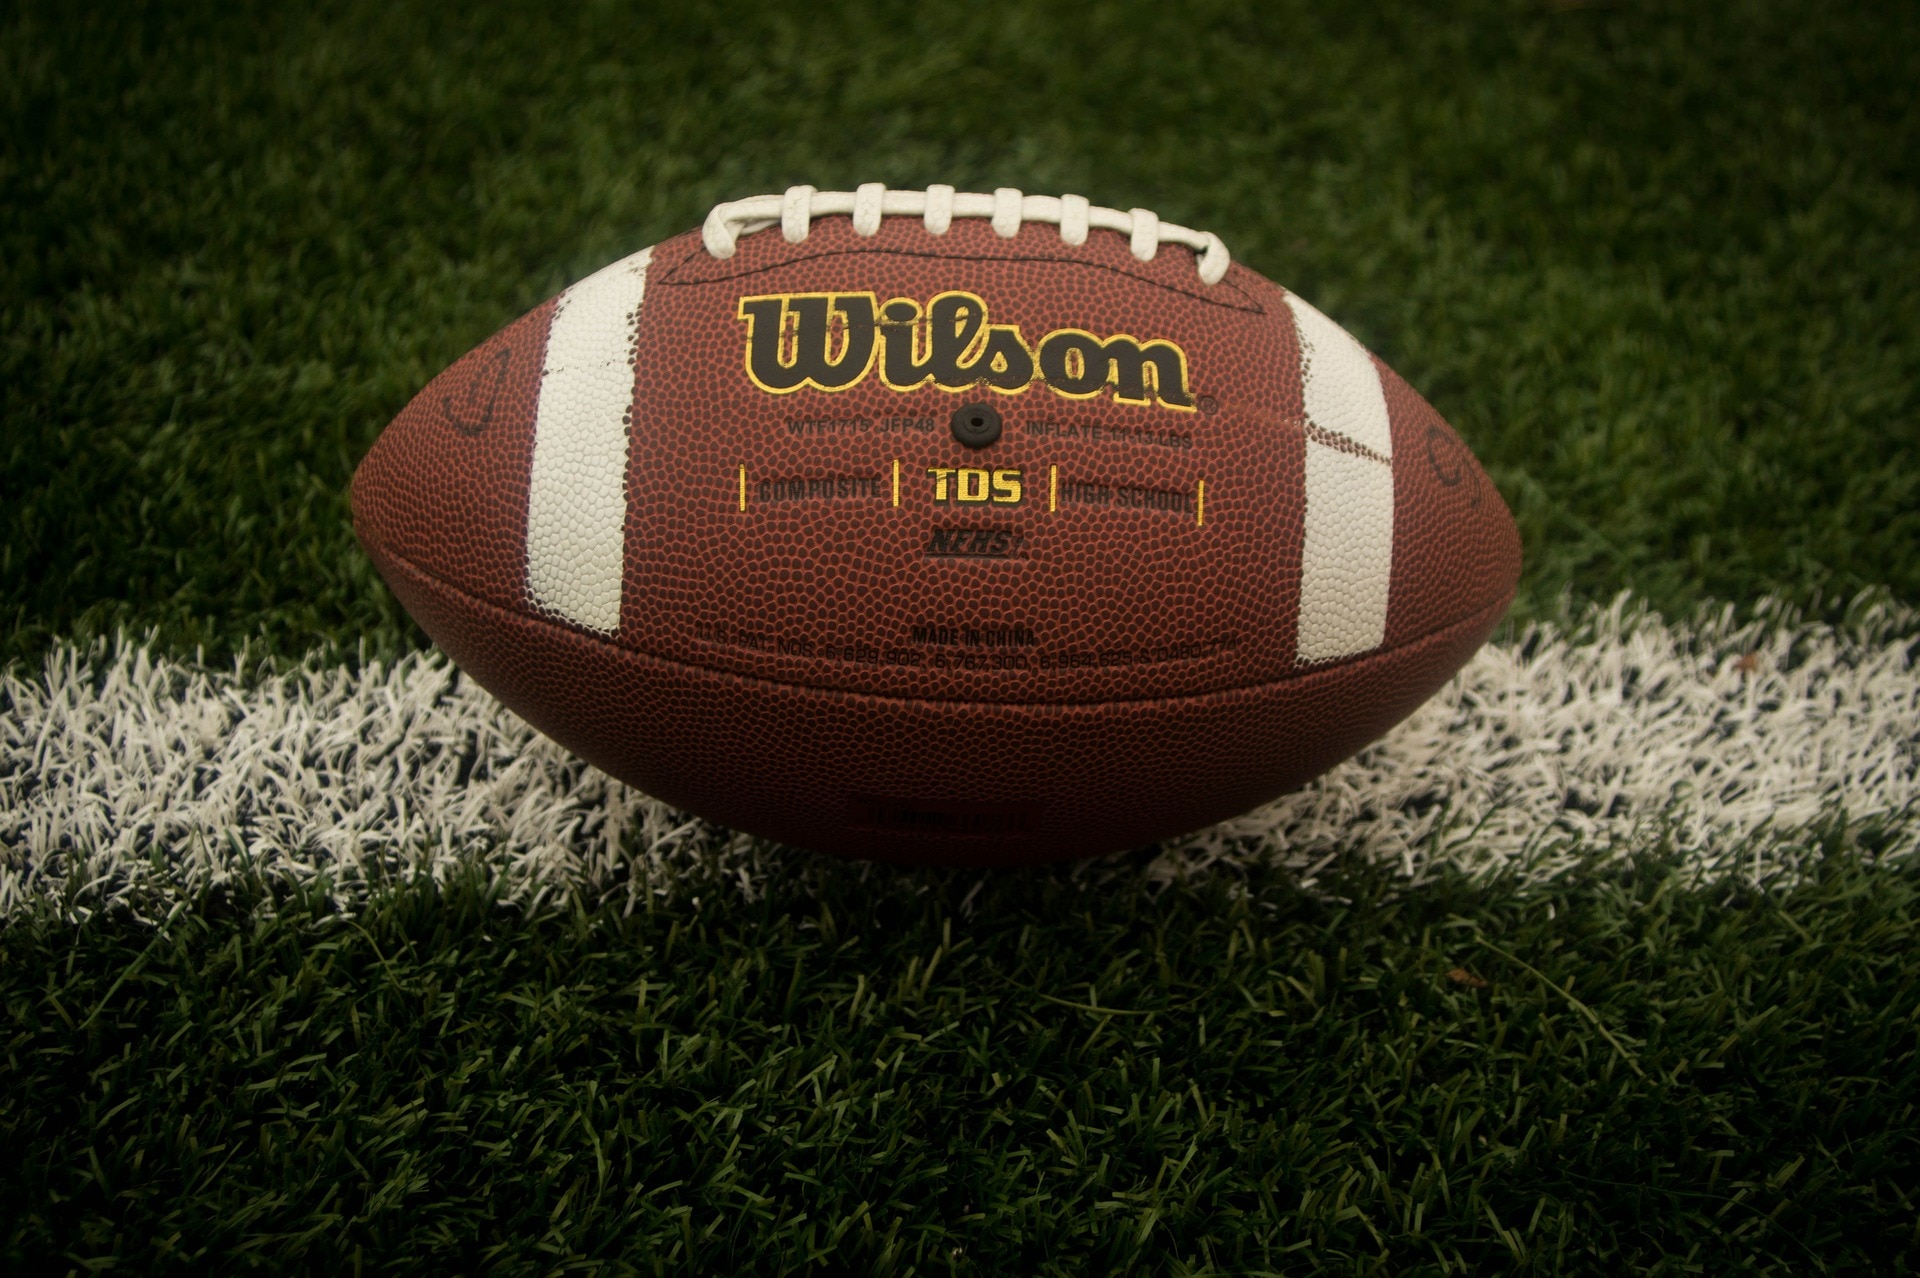 An image of a football